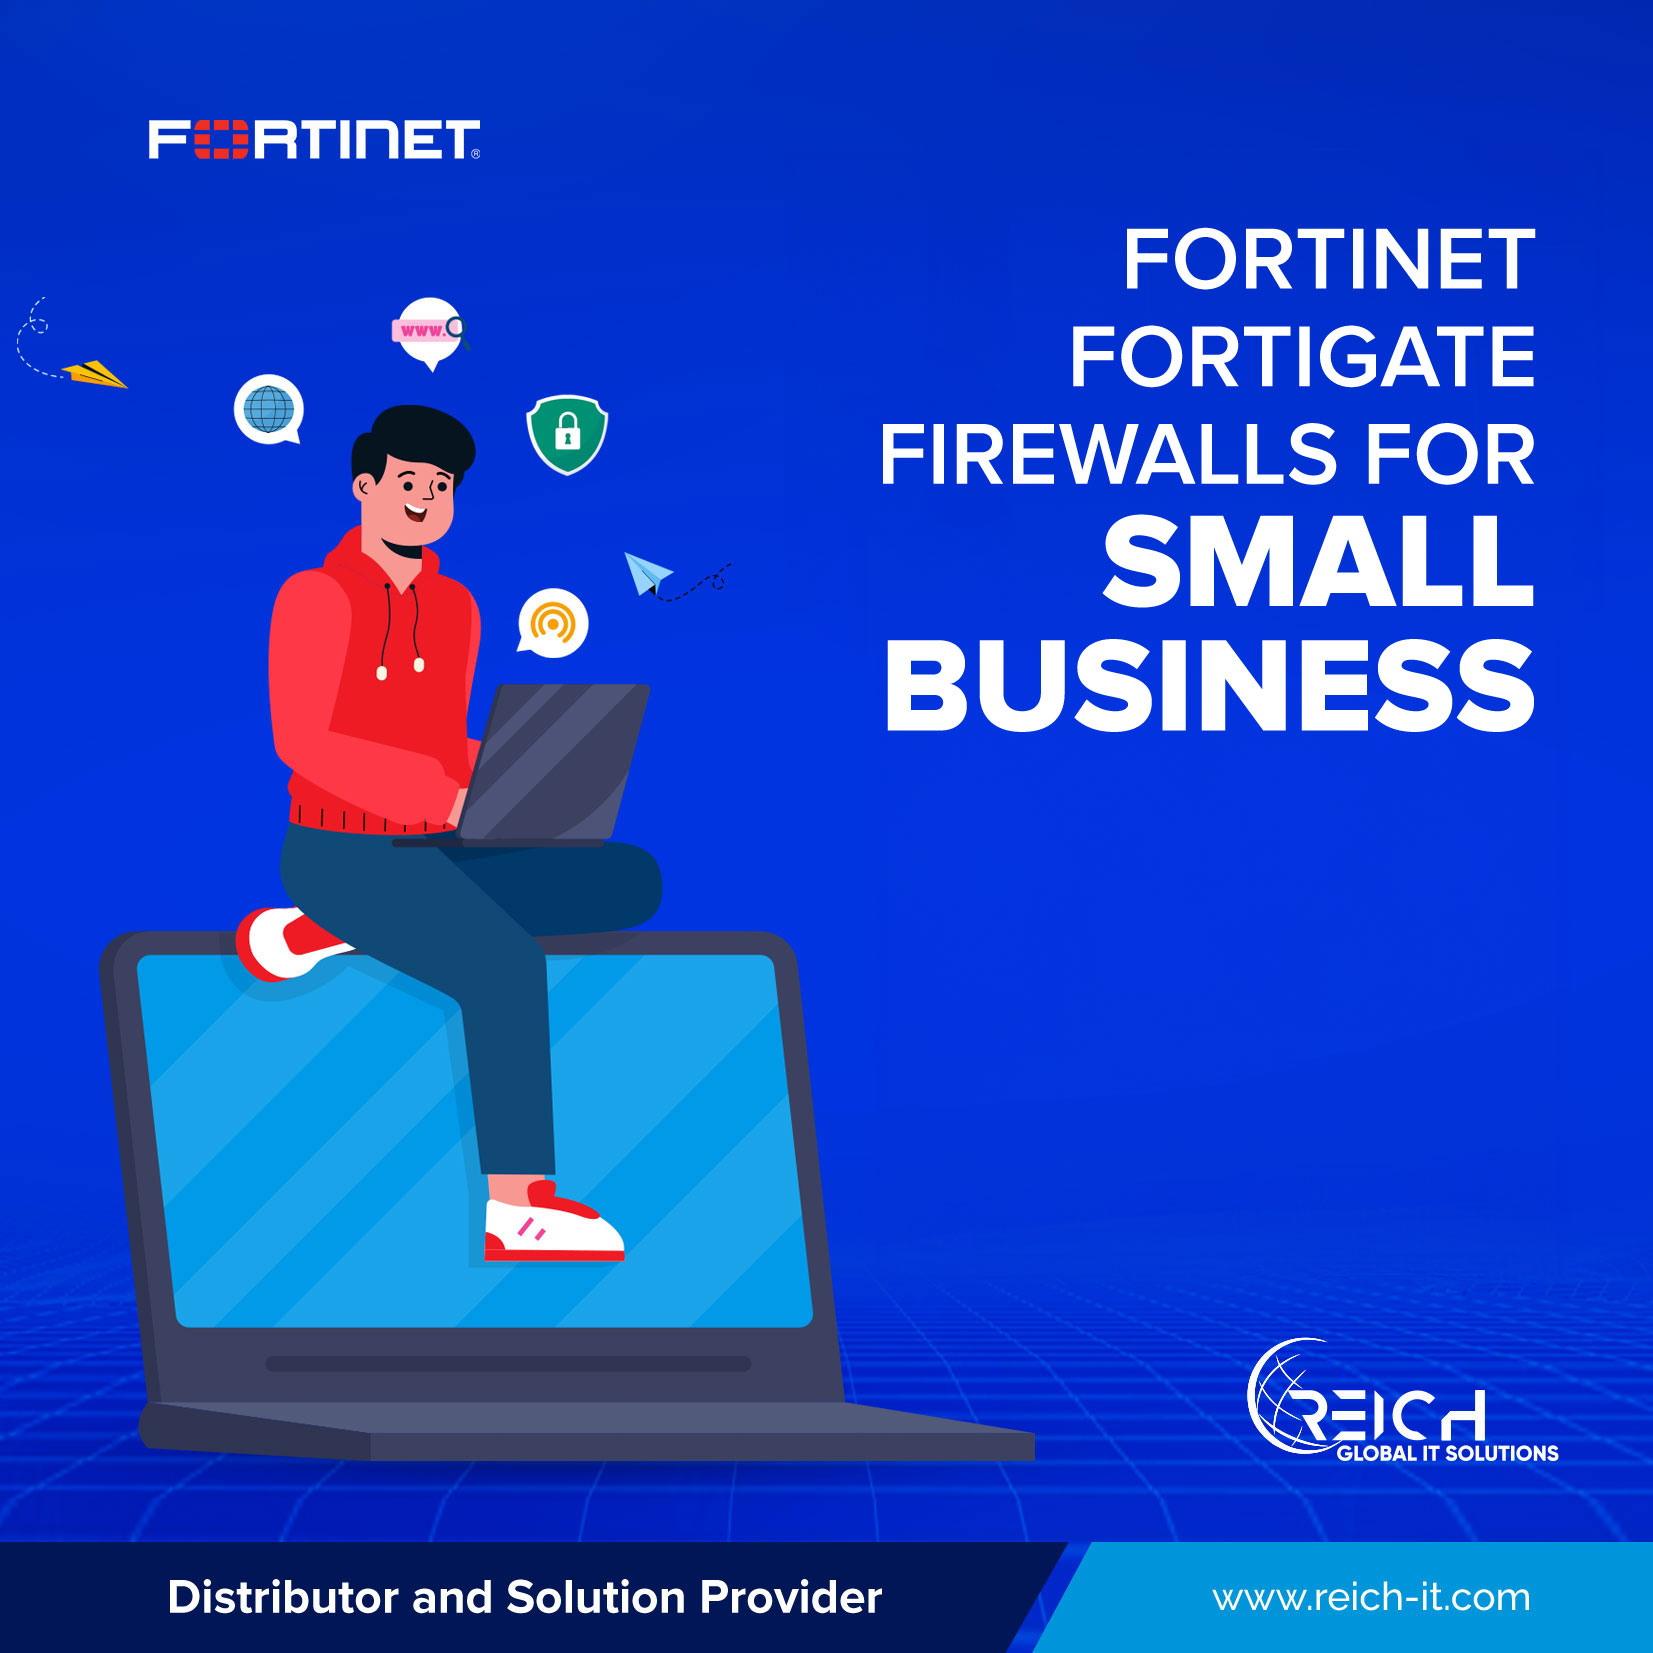 Fortinet FortiGate Firewalls for Small Business